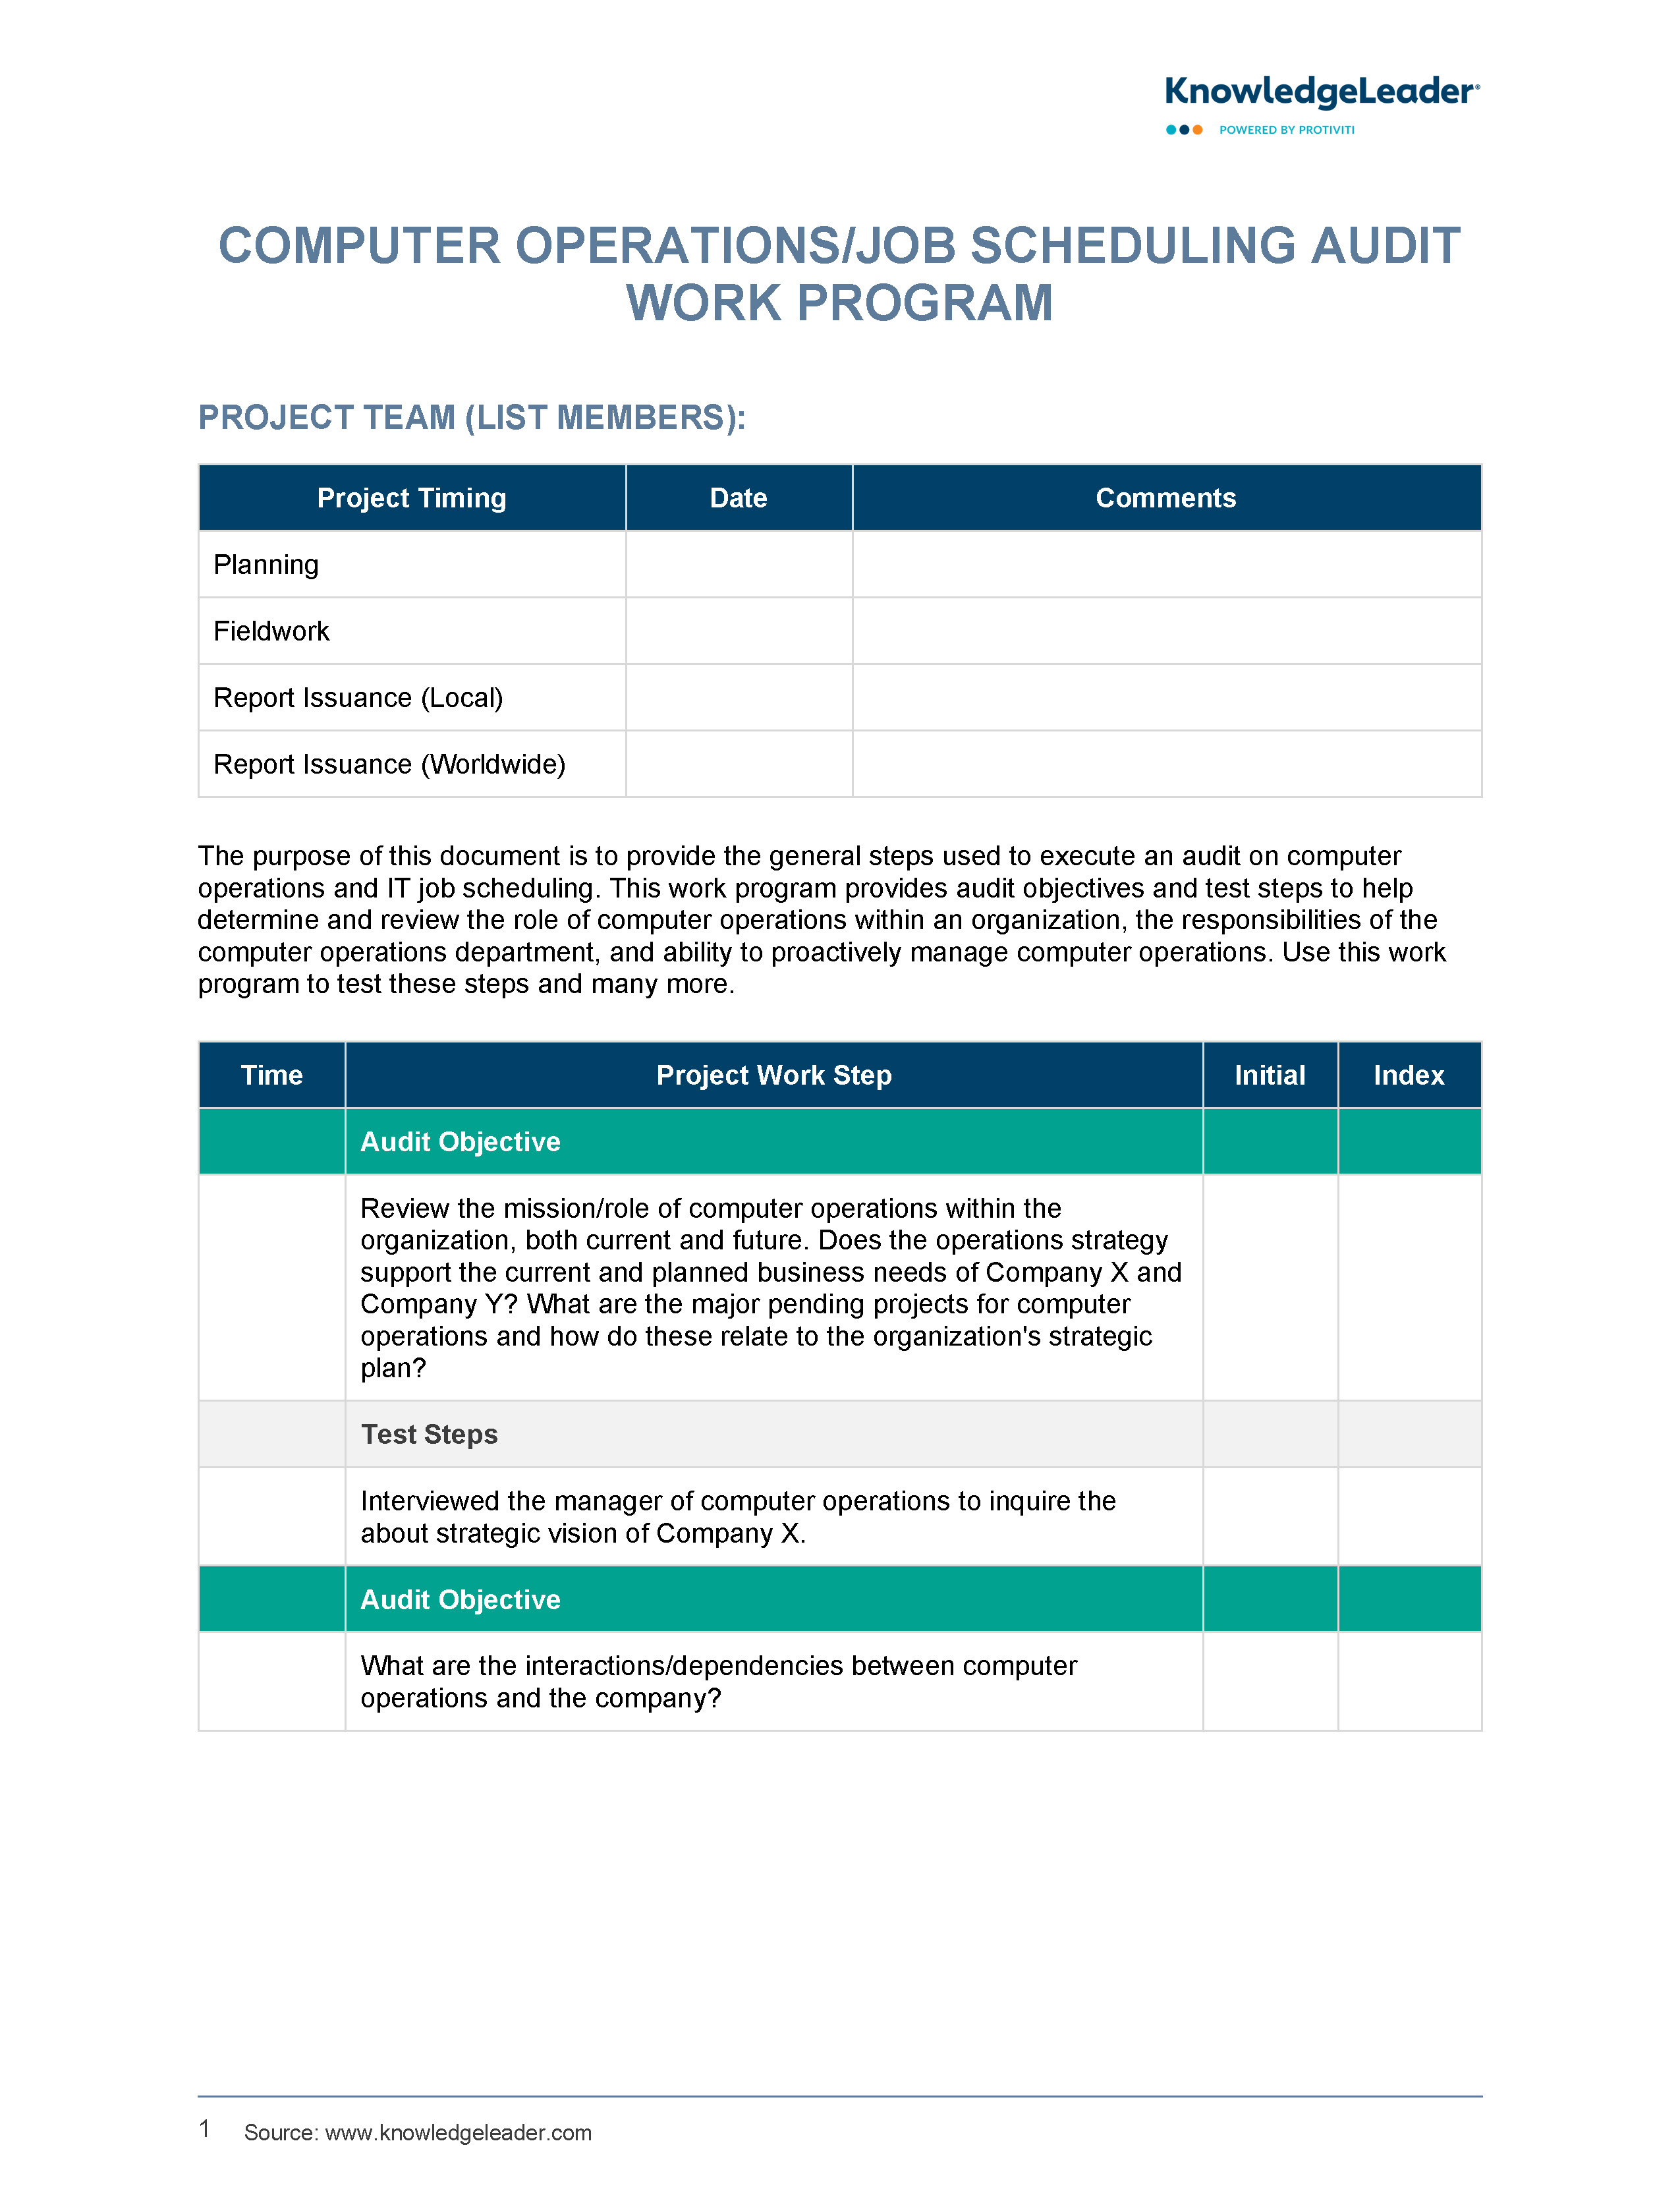 screenshot of the first page of Computer Operations/Job Scheduling Audit Work Program